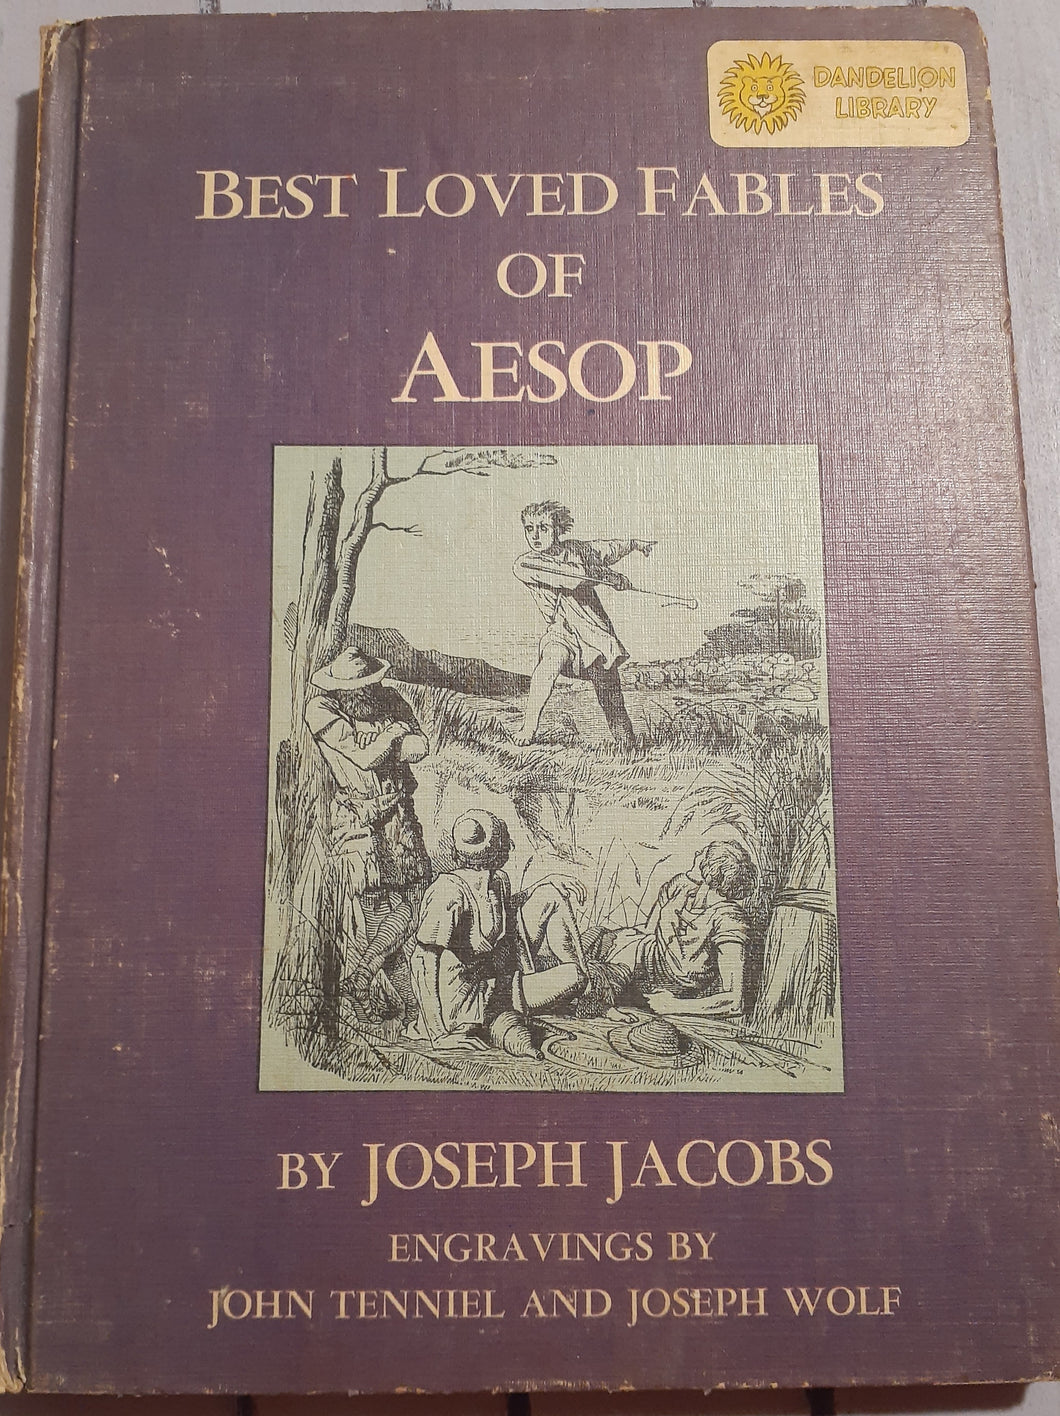 Best Loved Fables of Aesop